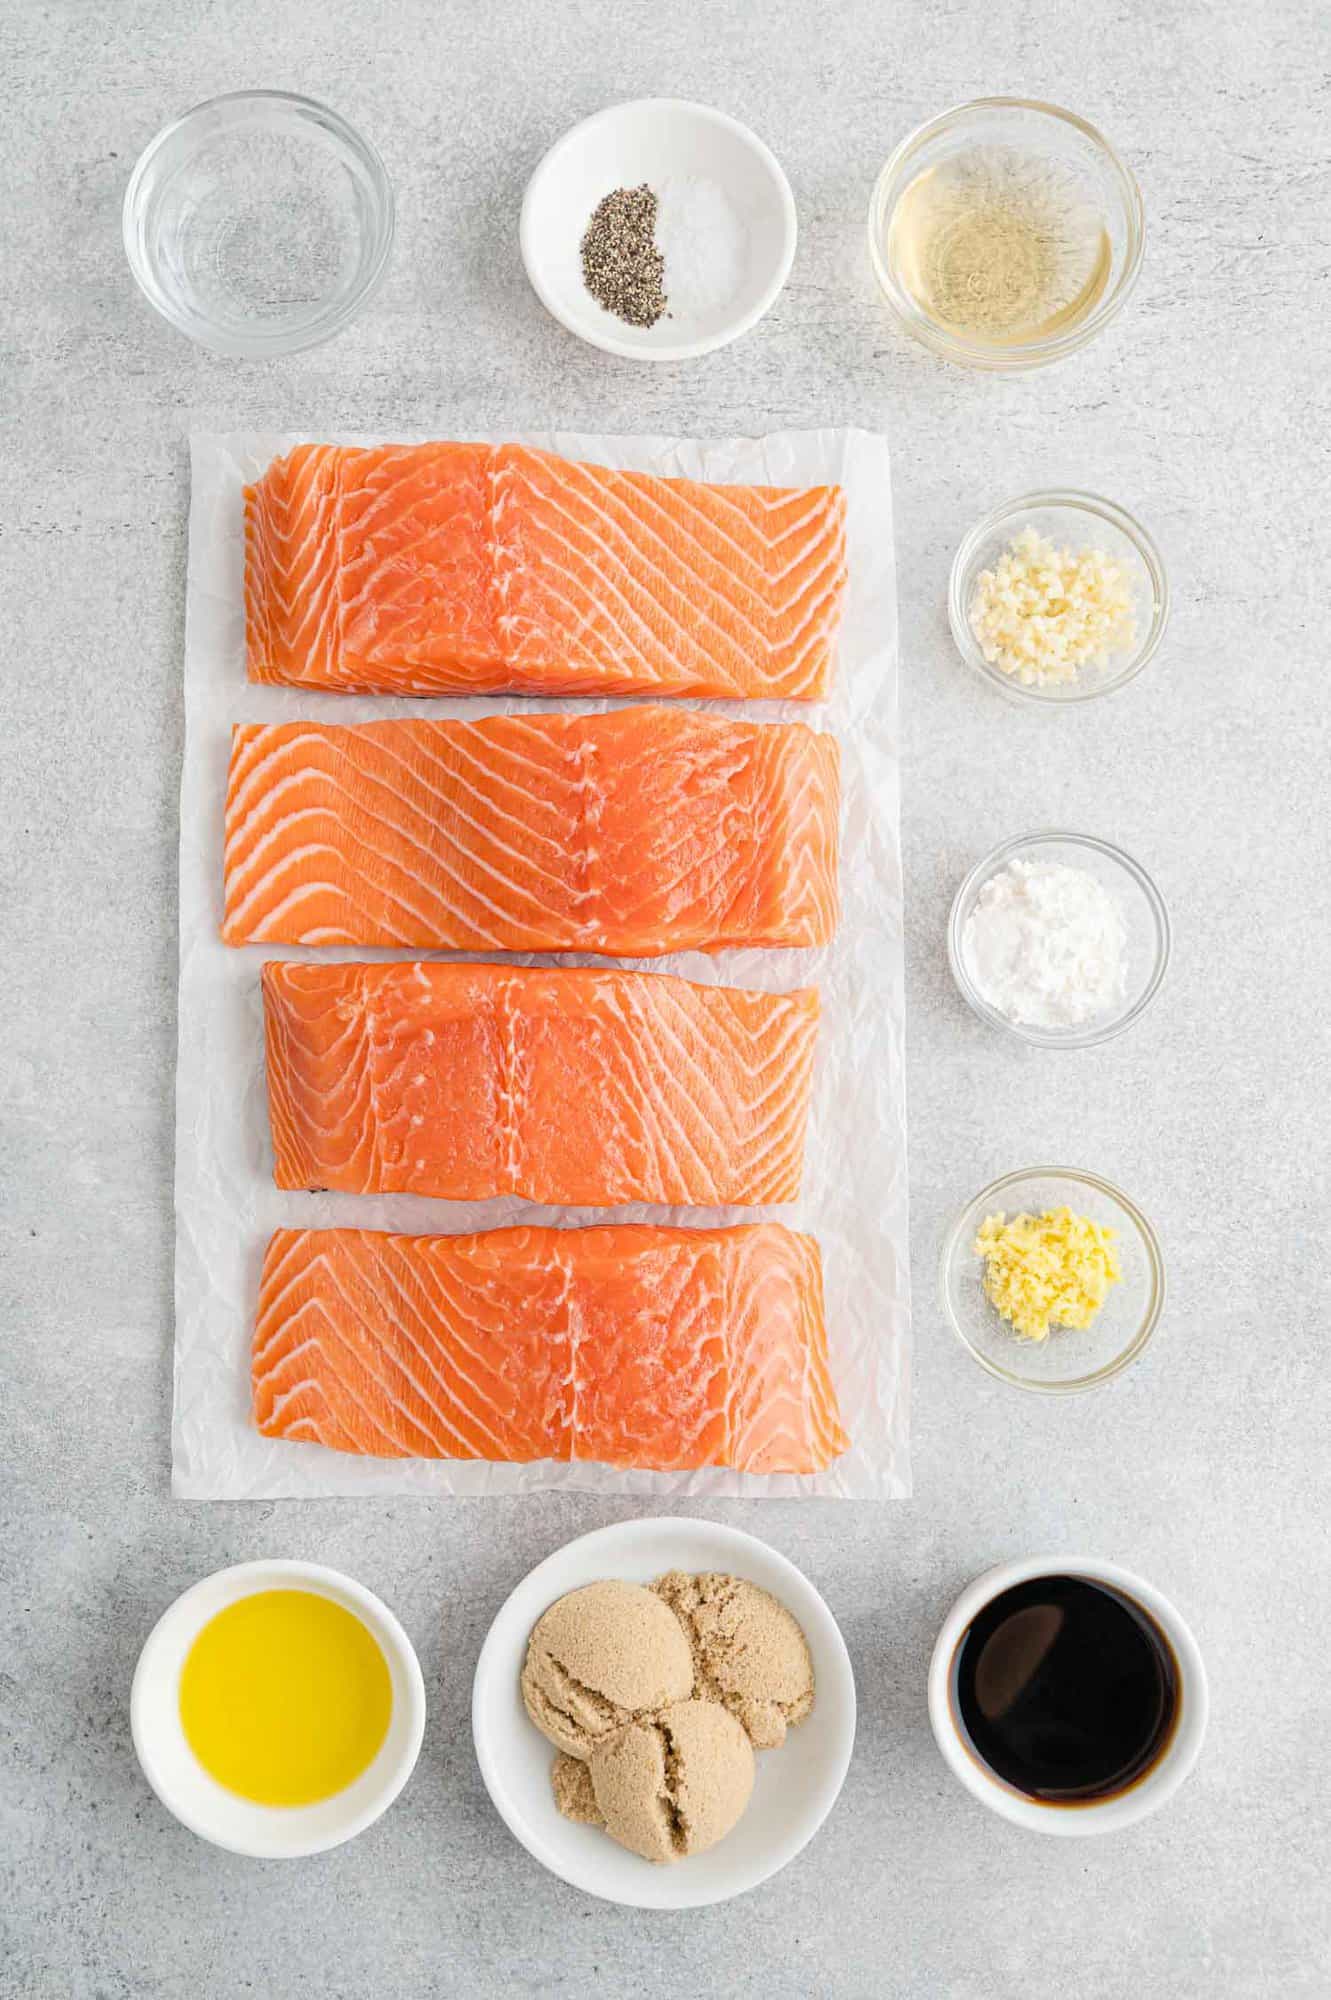 Ingredients needed for recipe, including salmon fillets.